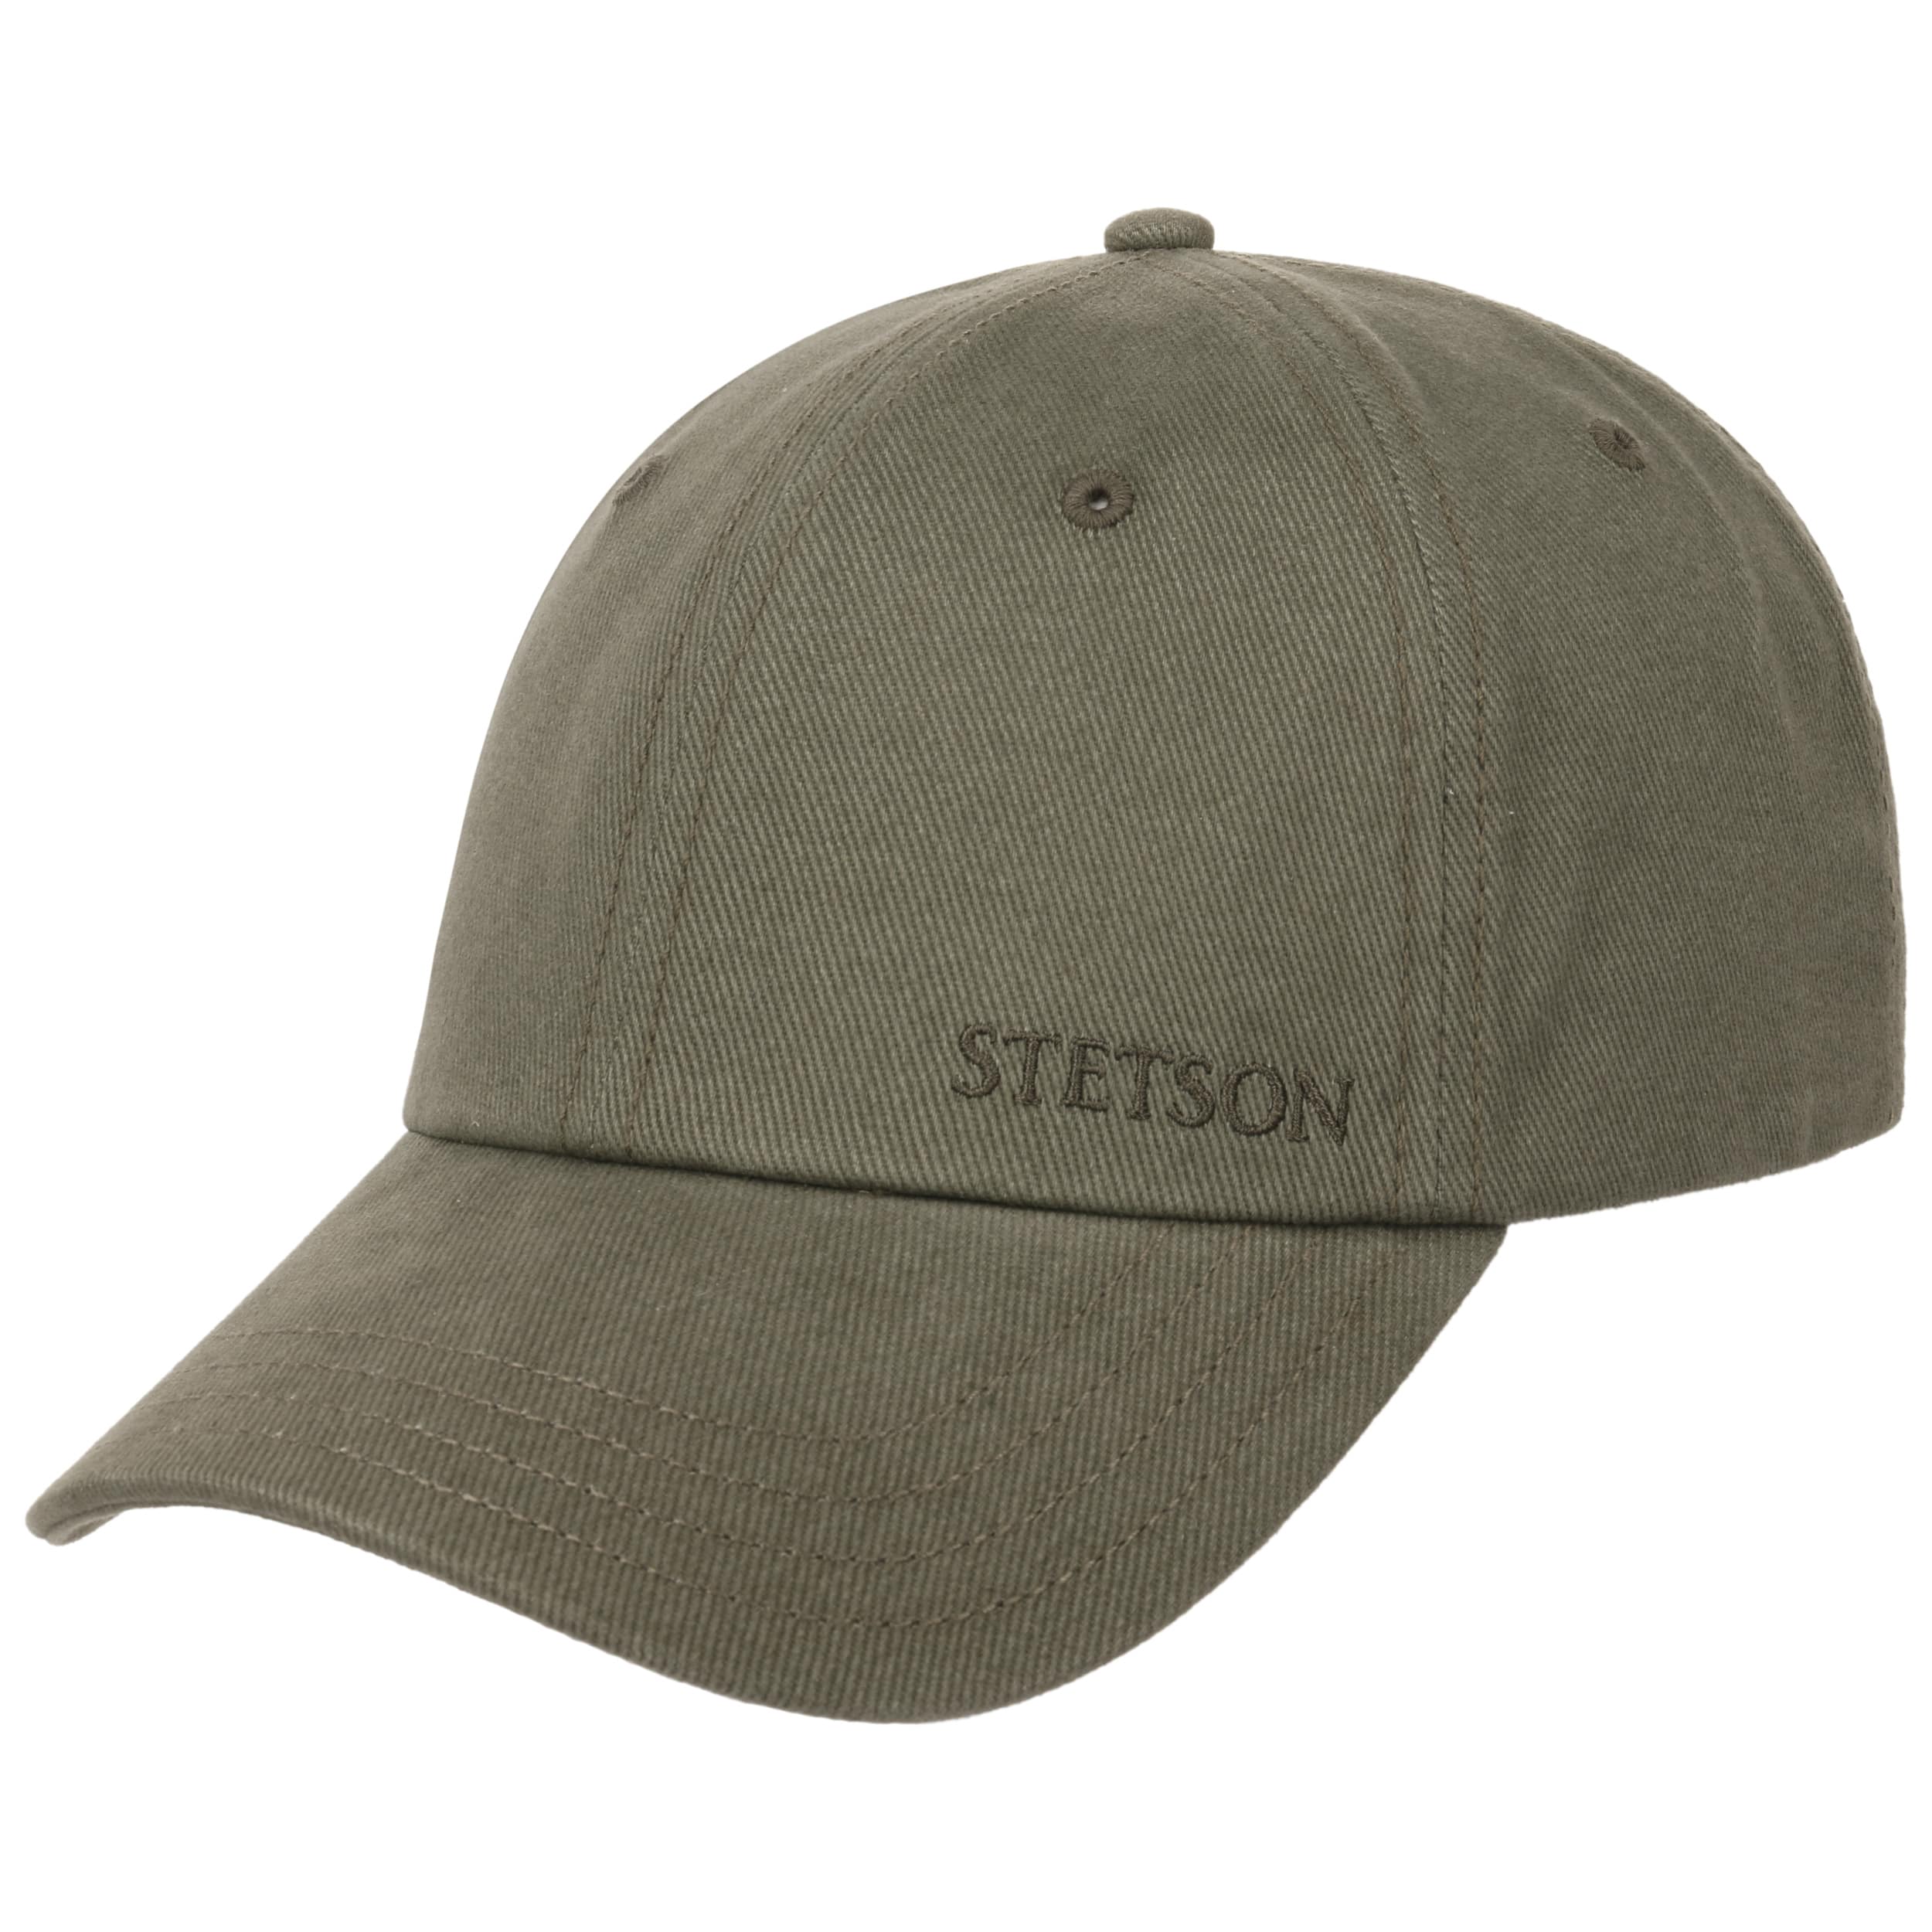 Brushed Twill Cap by Stetson - 49,00